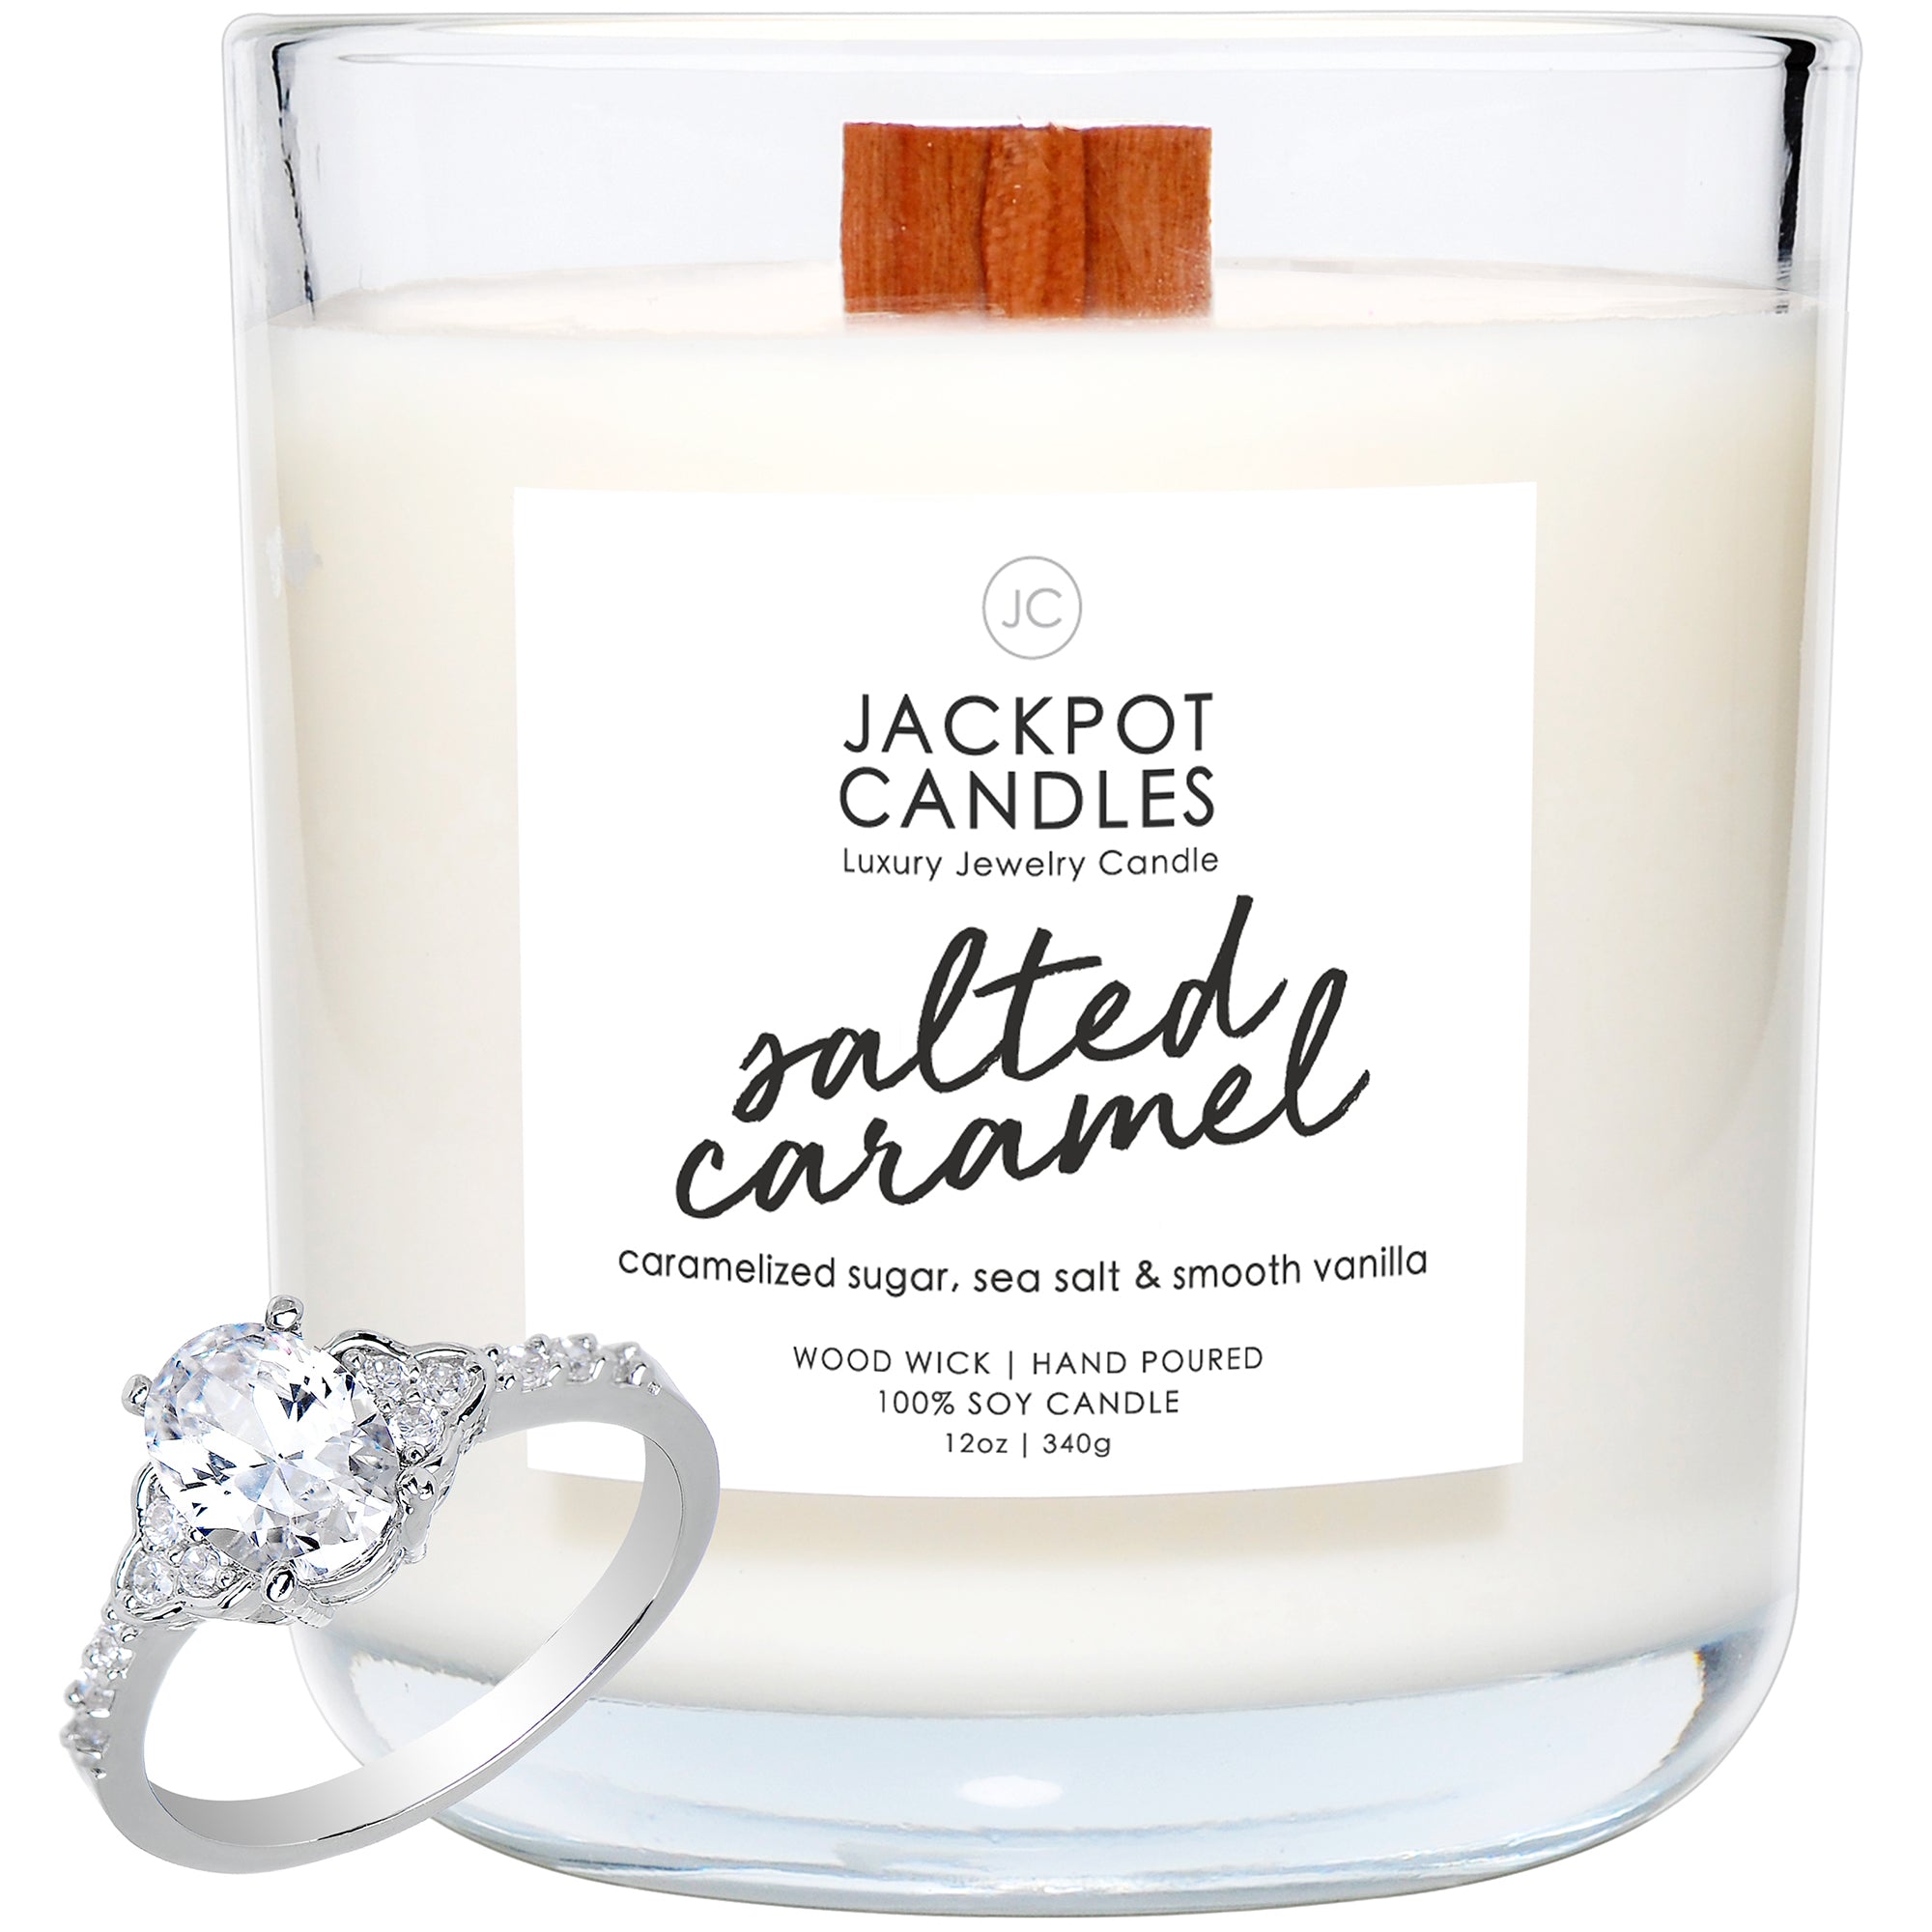 100% Soy Wax: Are Soy Candles Safe to Burn? - Jackpot Candles